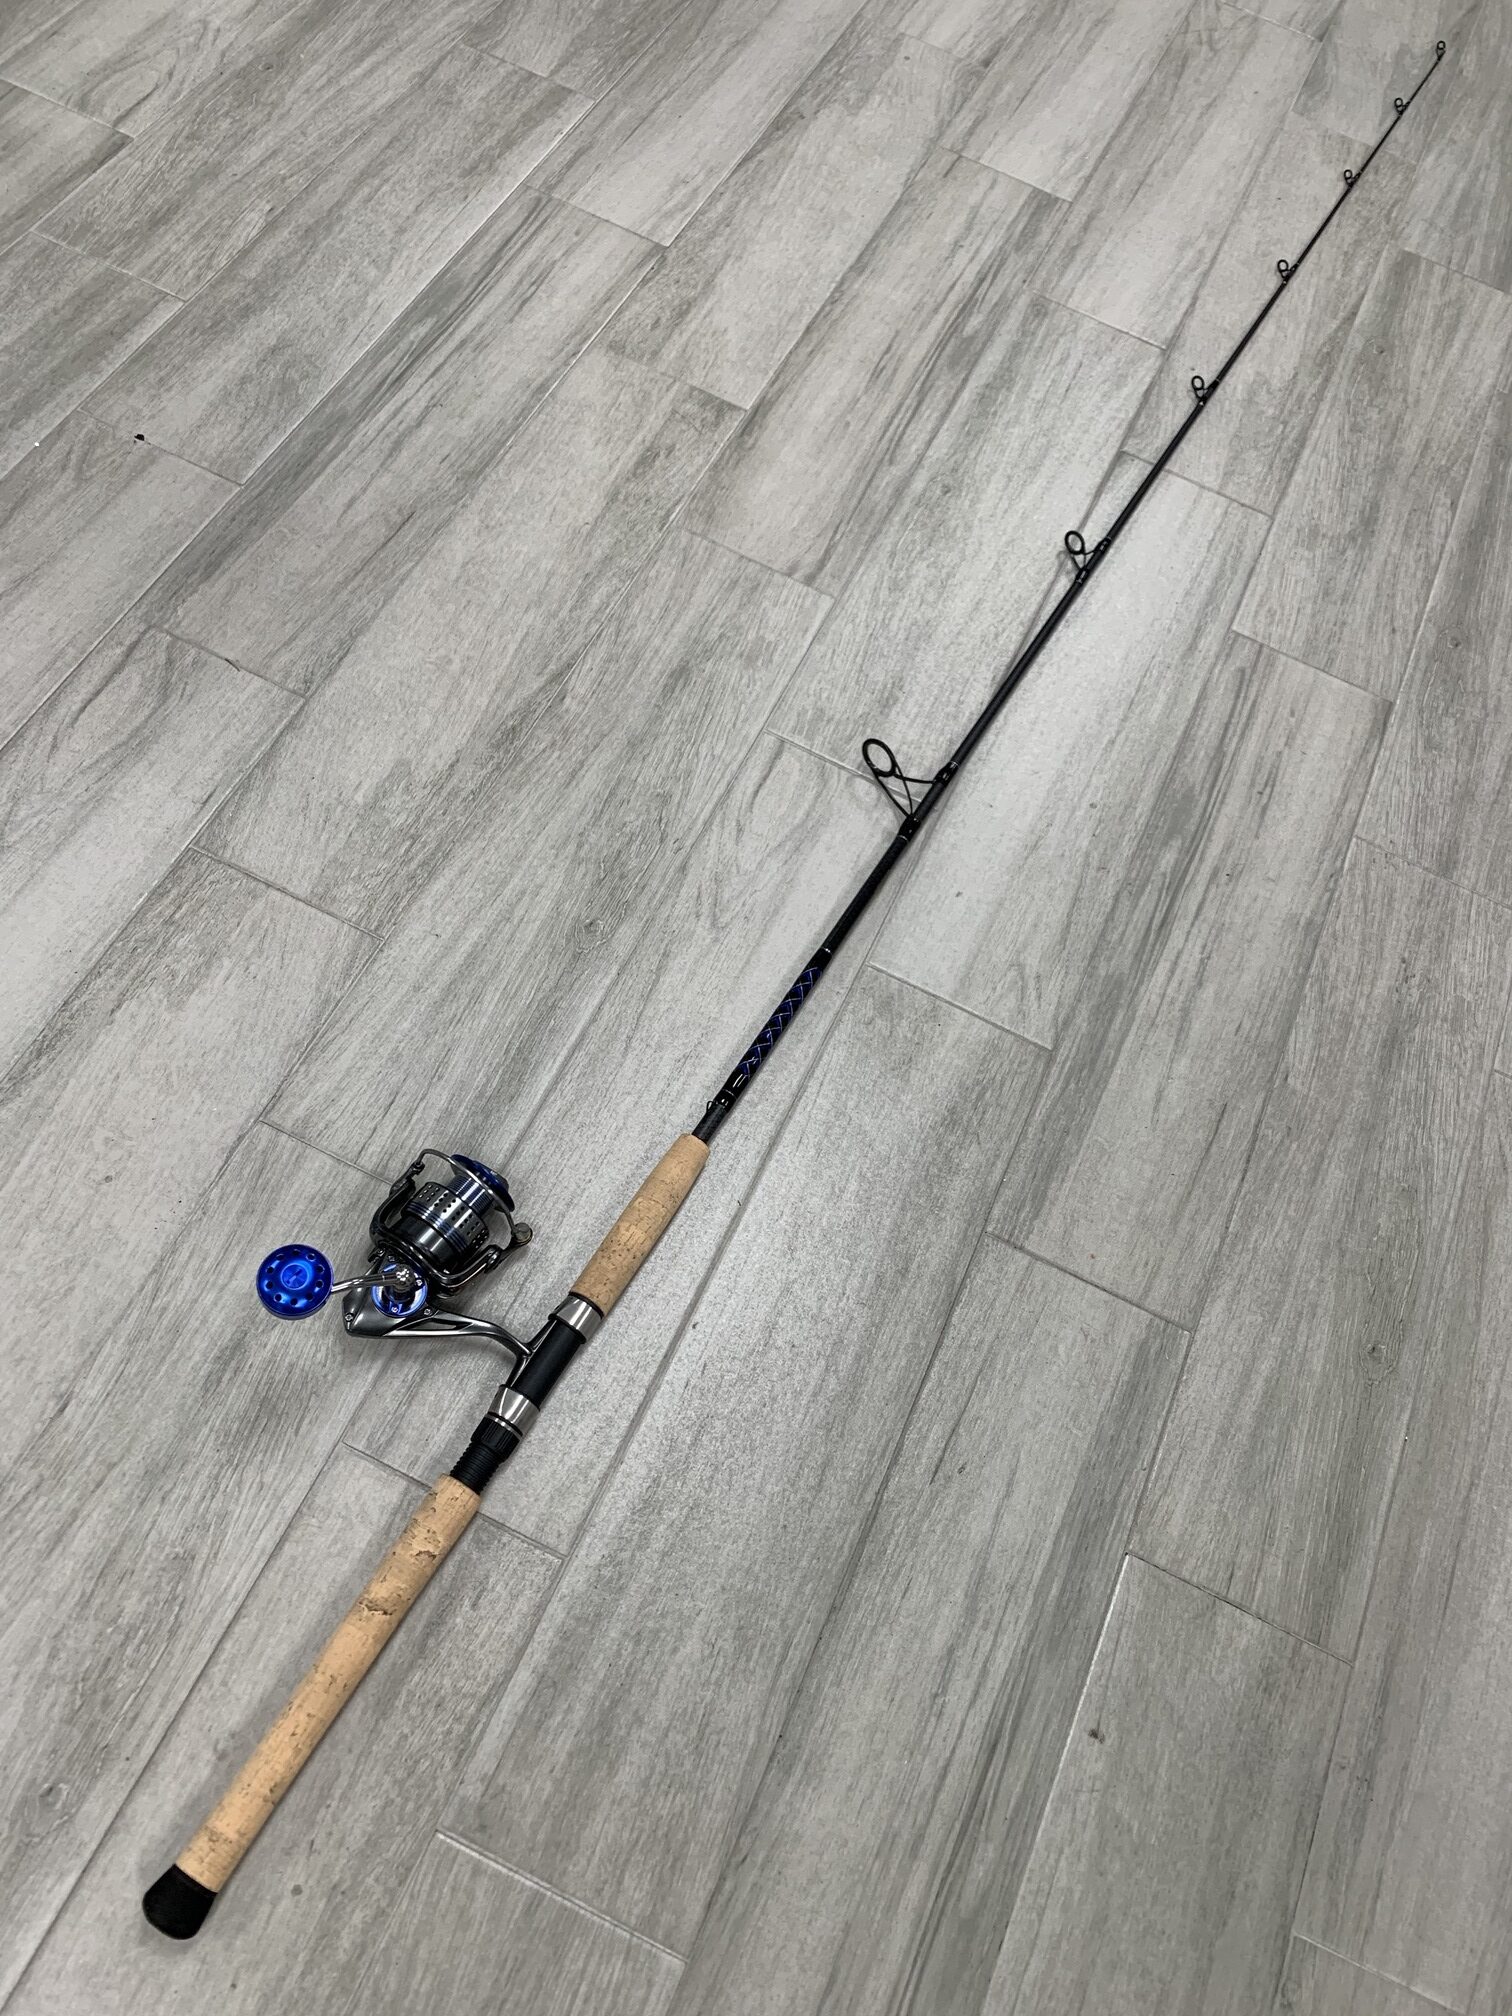 7' 8-17# Inshore Carbon Fiber Spinning Rod with Canyon 3500 Spinning Reel  Blue-Silver